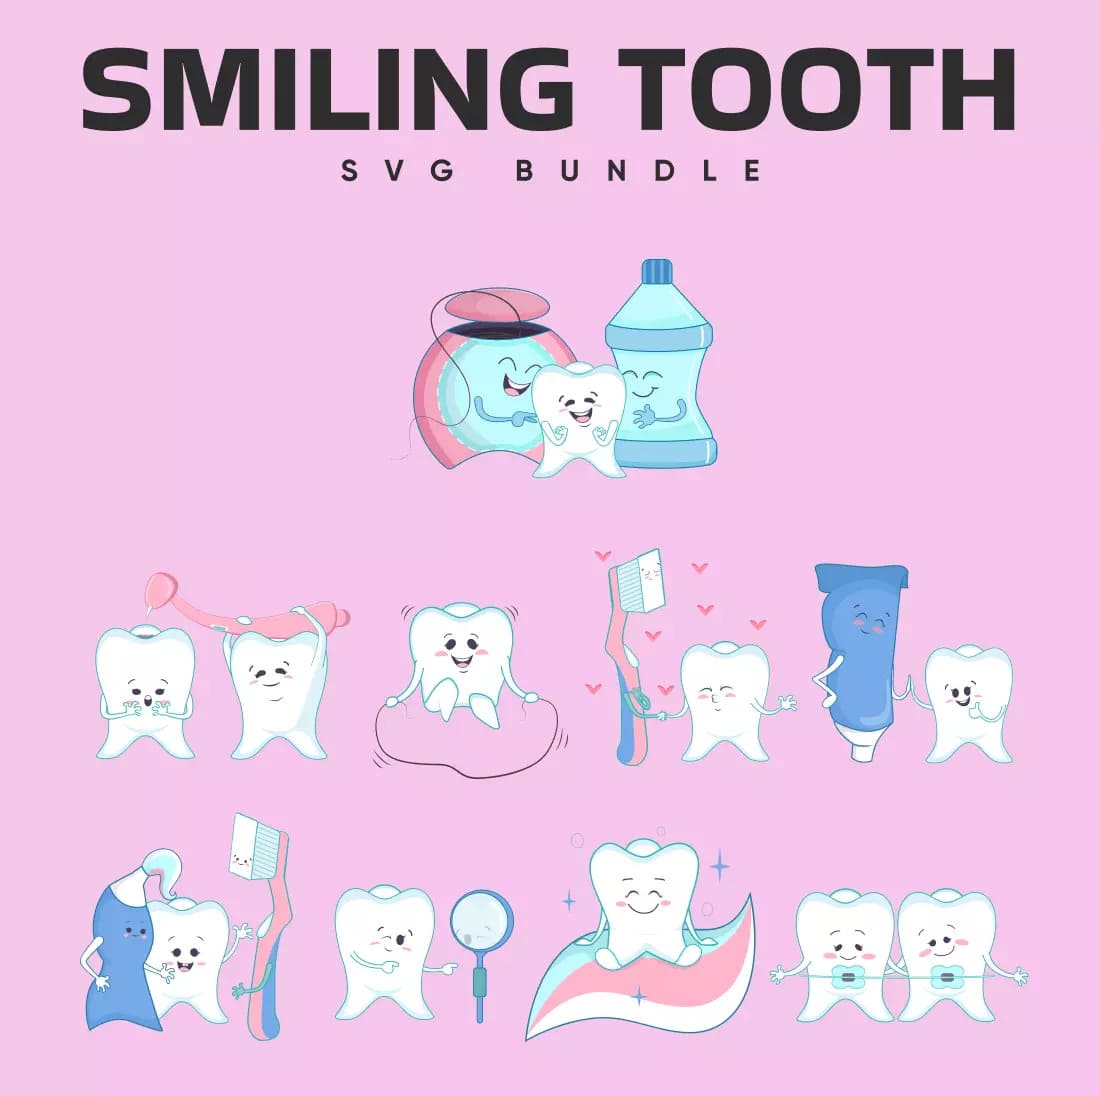 Smiling Tooth SVG Bundle Preview.